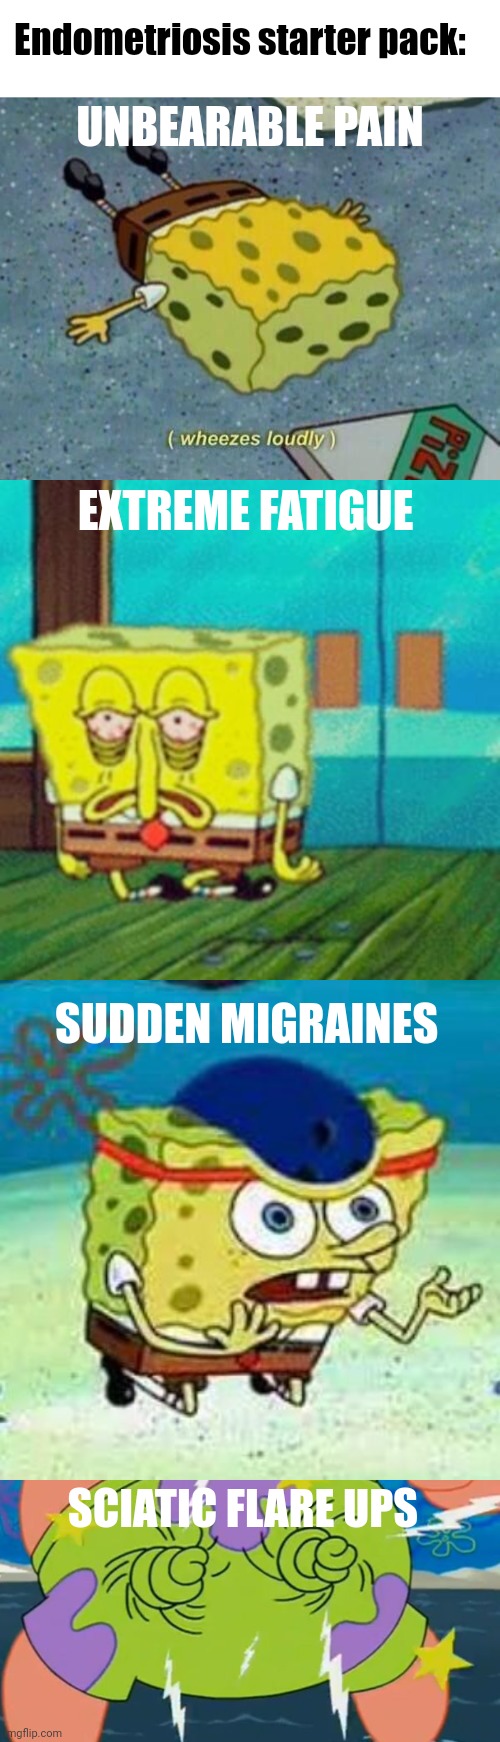 It's a bee with an itch | Endometriosis starter pack:; UNBEARABLE PAIN; EXTREME FATIGUE; SUDDEN MIGRAINES; SCIATIC FLARE UPS | image tagged in spongebob | made w/ Imgflip meme maker